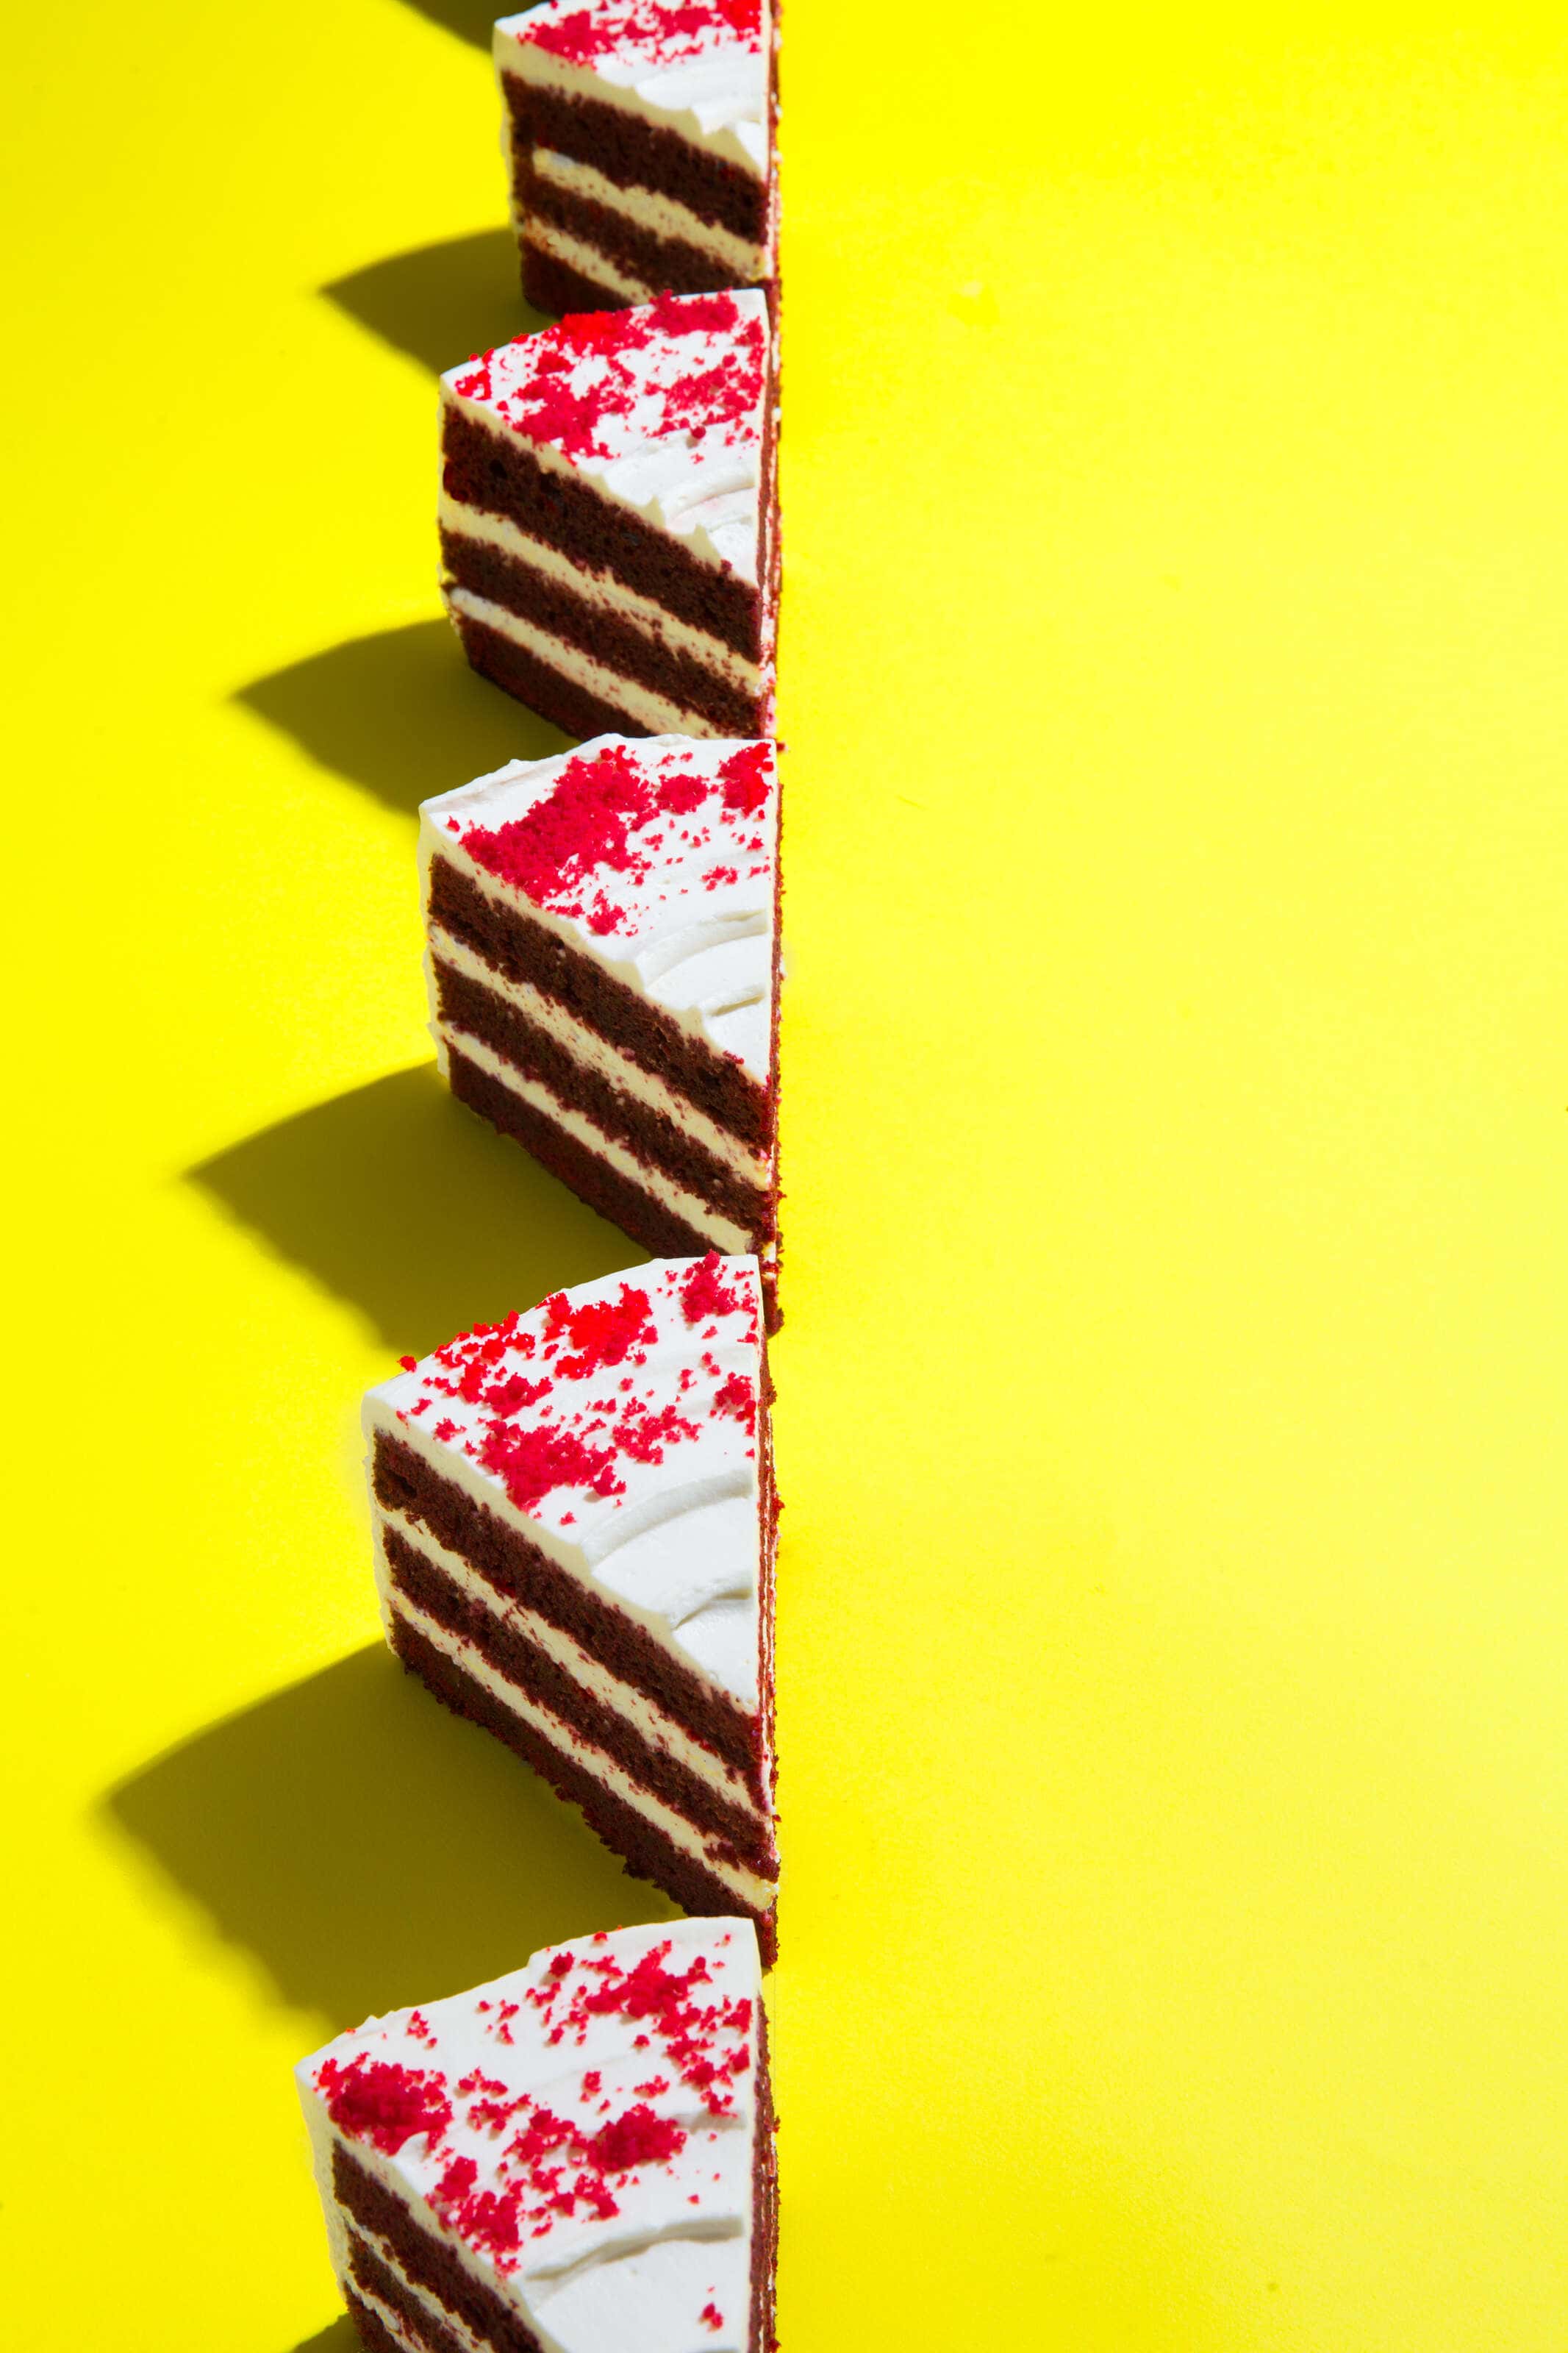 Red velvet cake photographed on a yellow background with hard shadows in a pop art style.